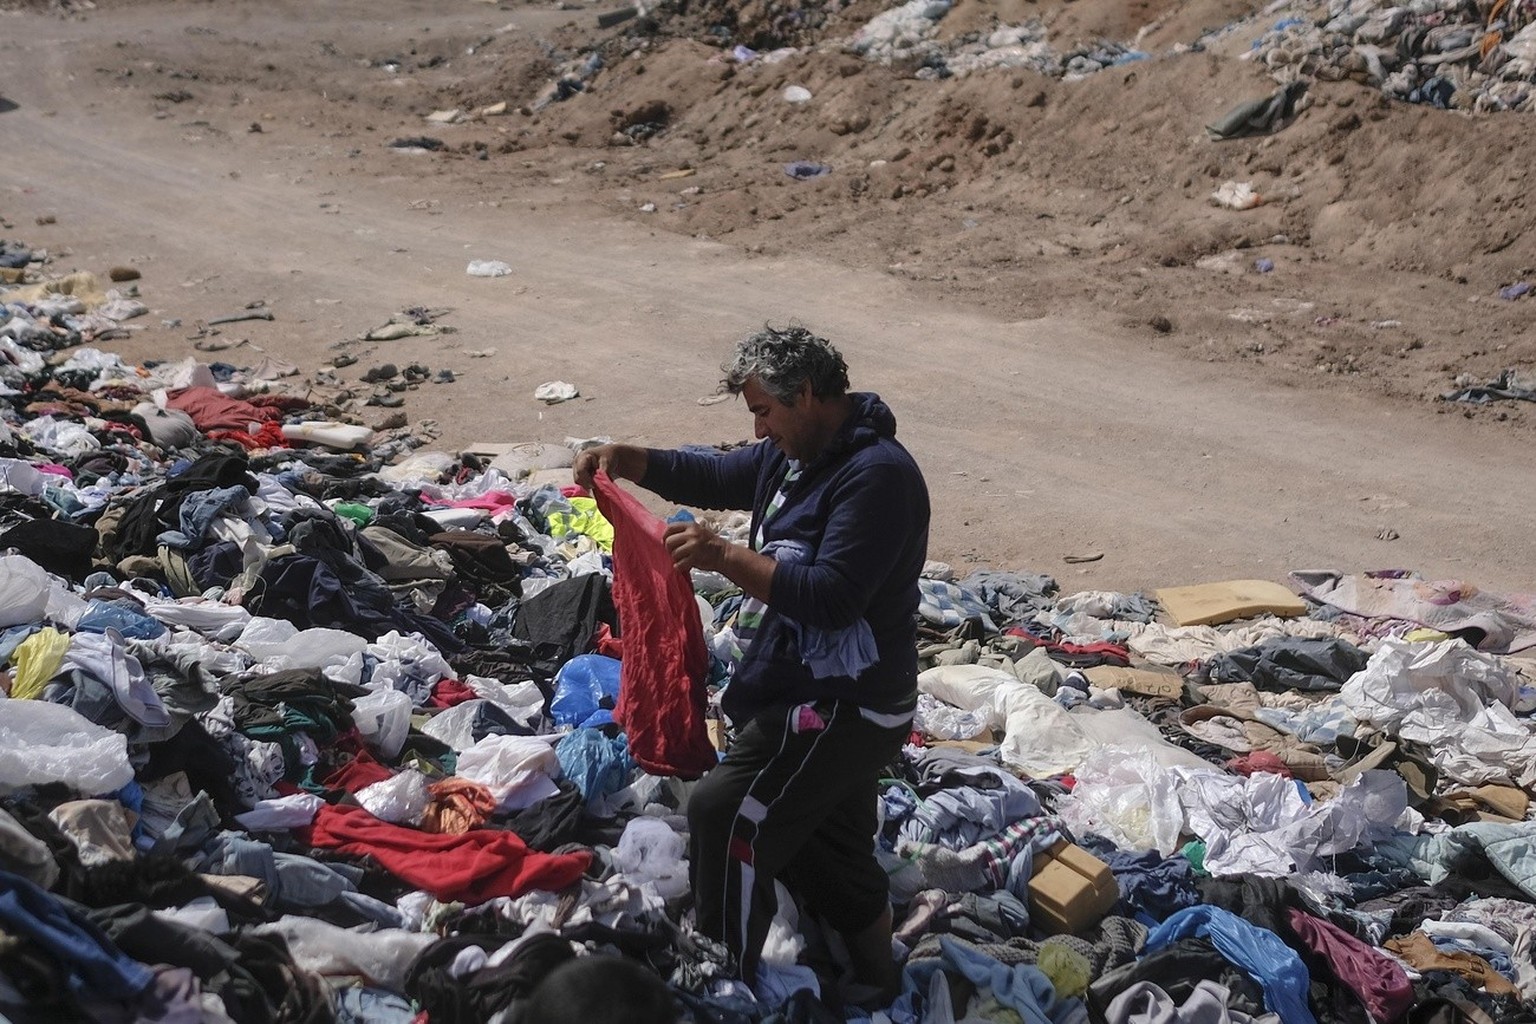 Alexis Carreno looks through a large pile of second-hand clothing near La Mula neighborhood in Alto Hospicio, Chile, Monday, Dec. 13, 2021. Chile is a big importer of second hand clothing, and unsold  ...